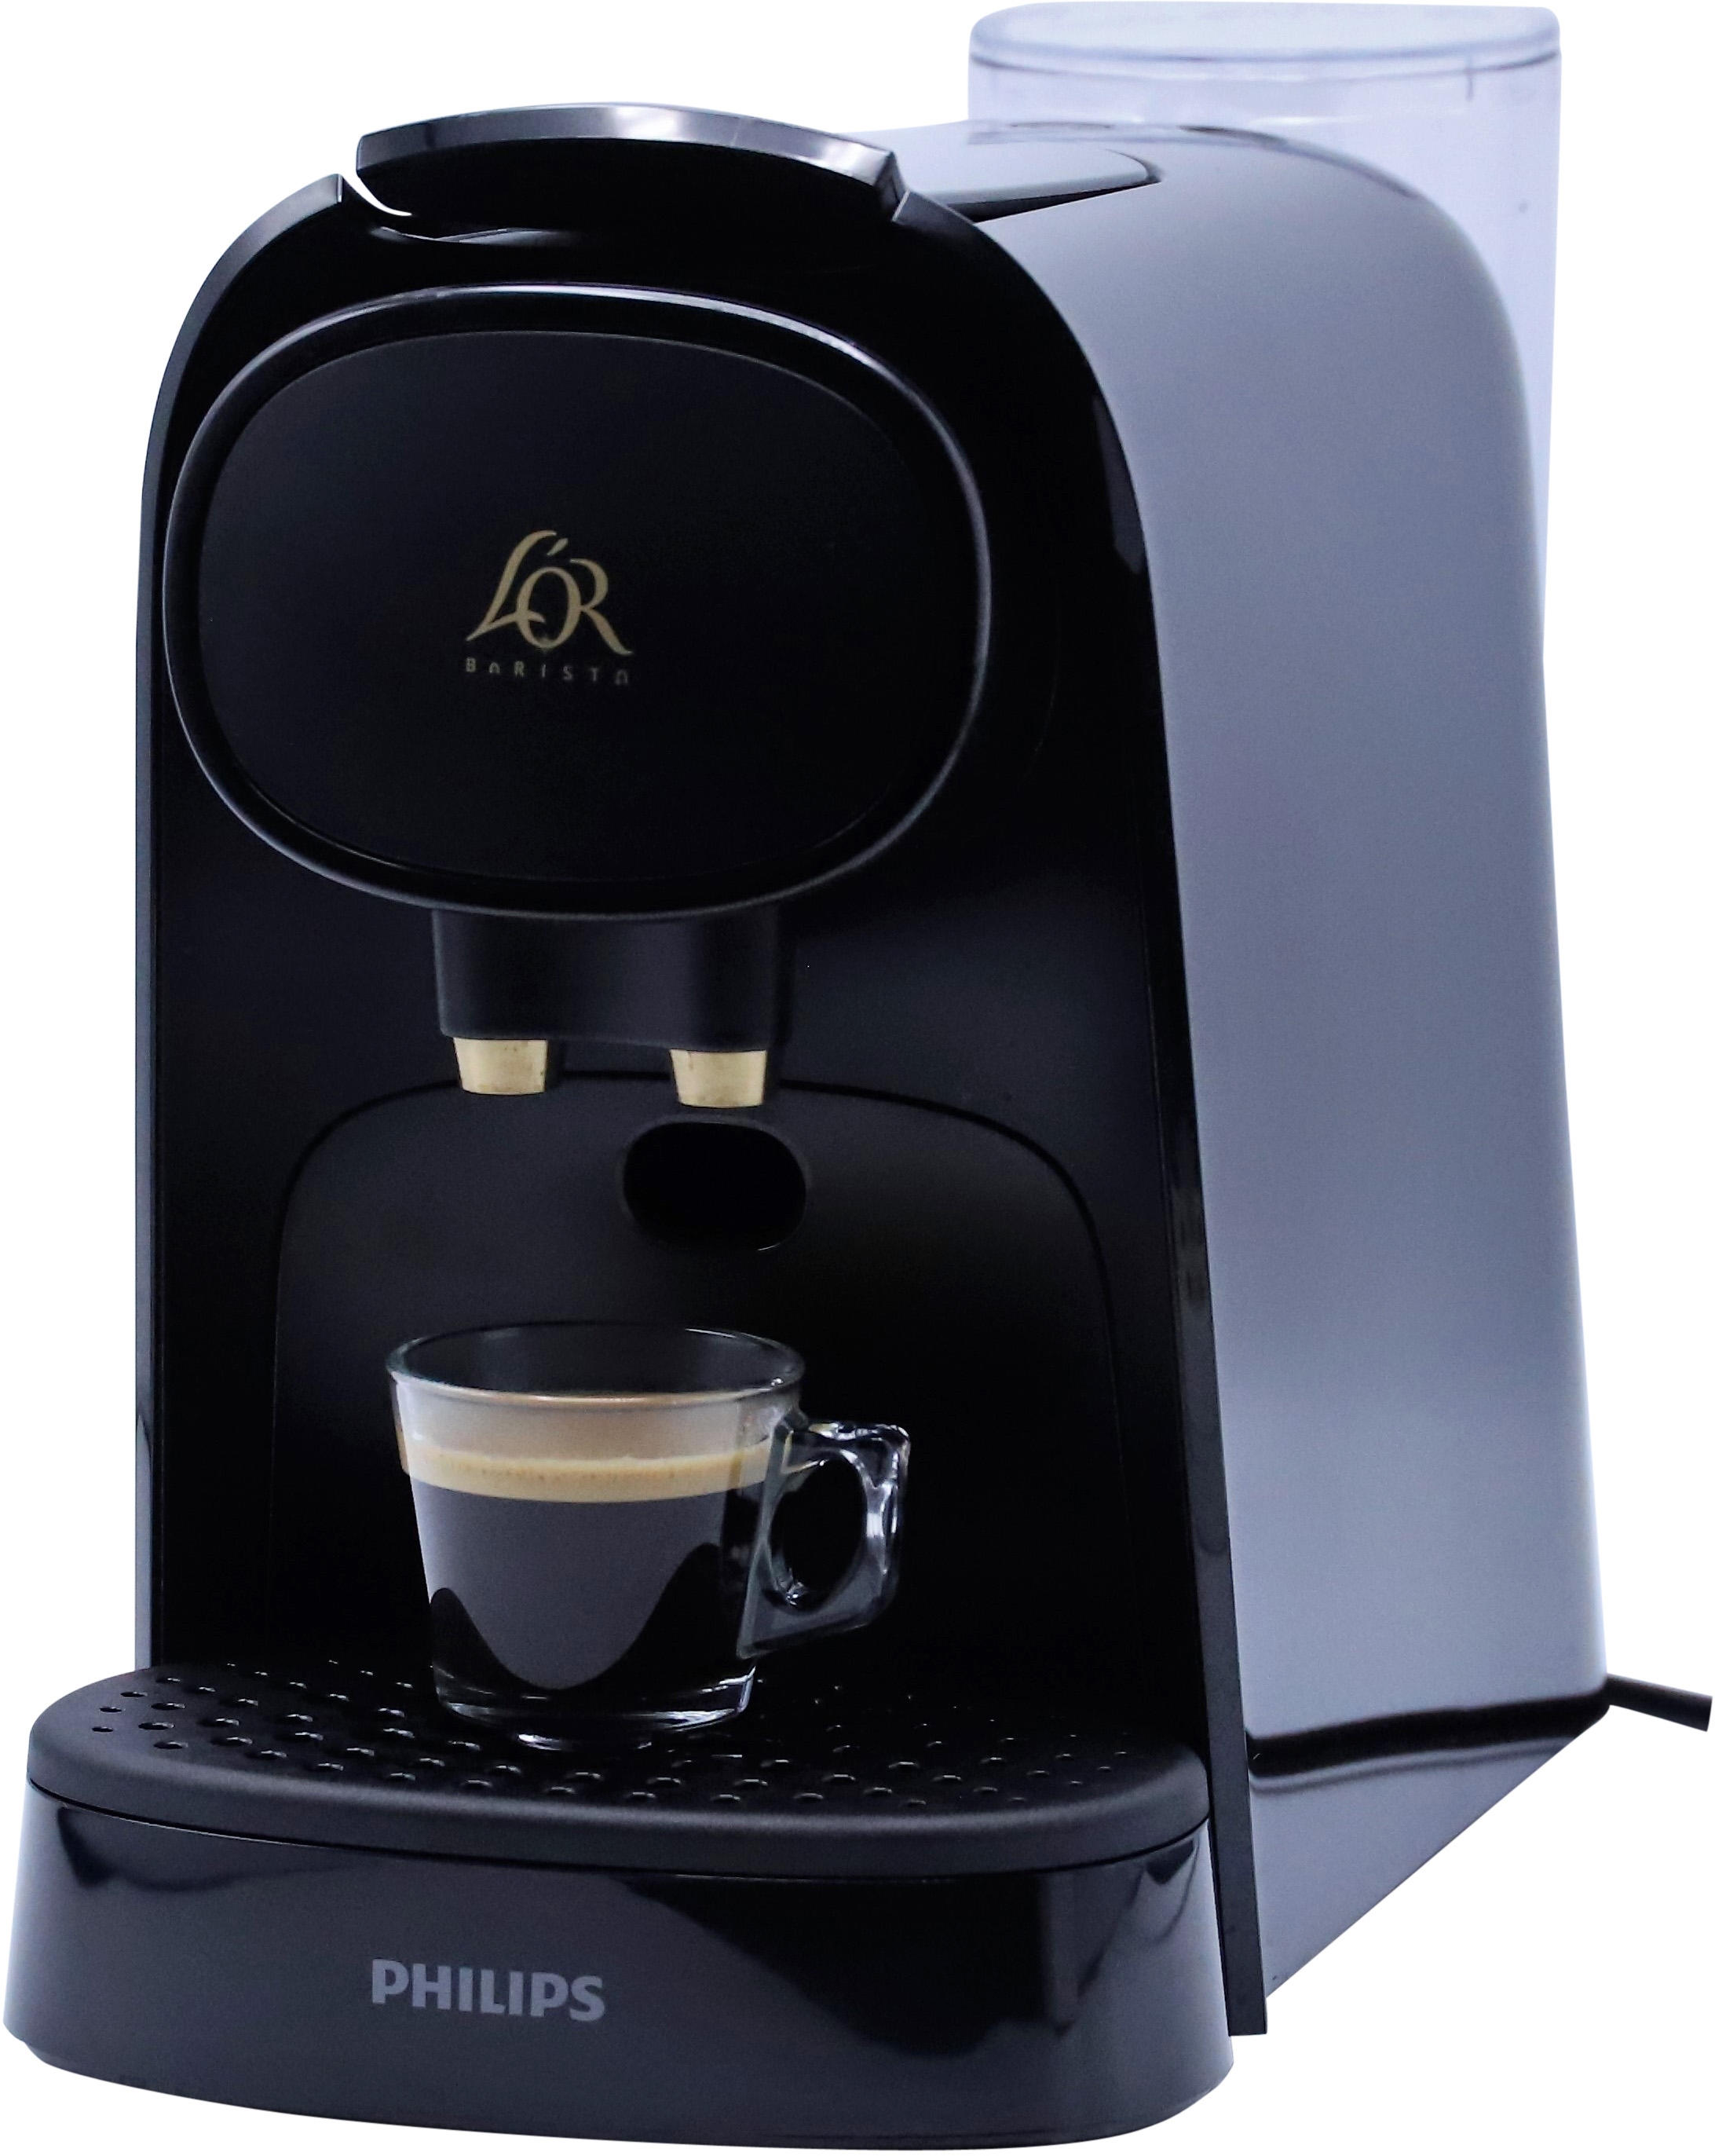 L´OR BARISTA LM8012/60